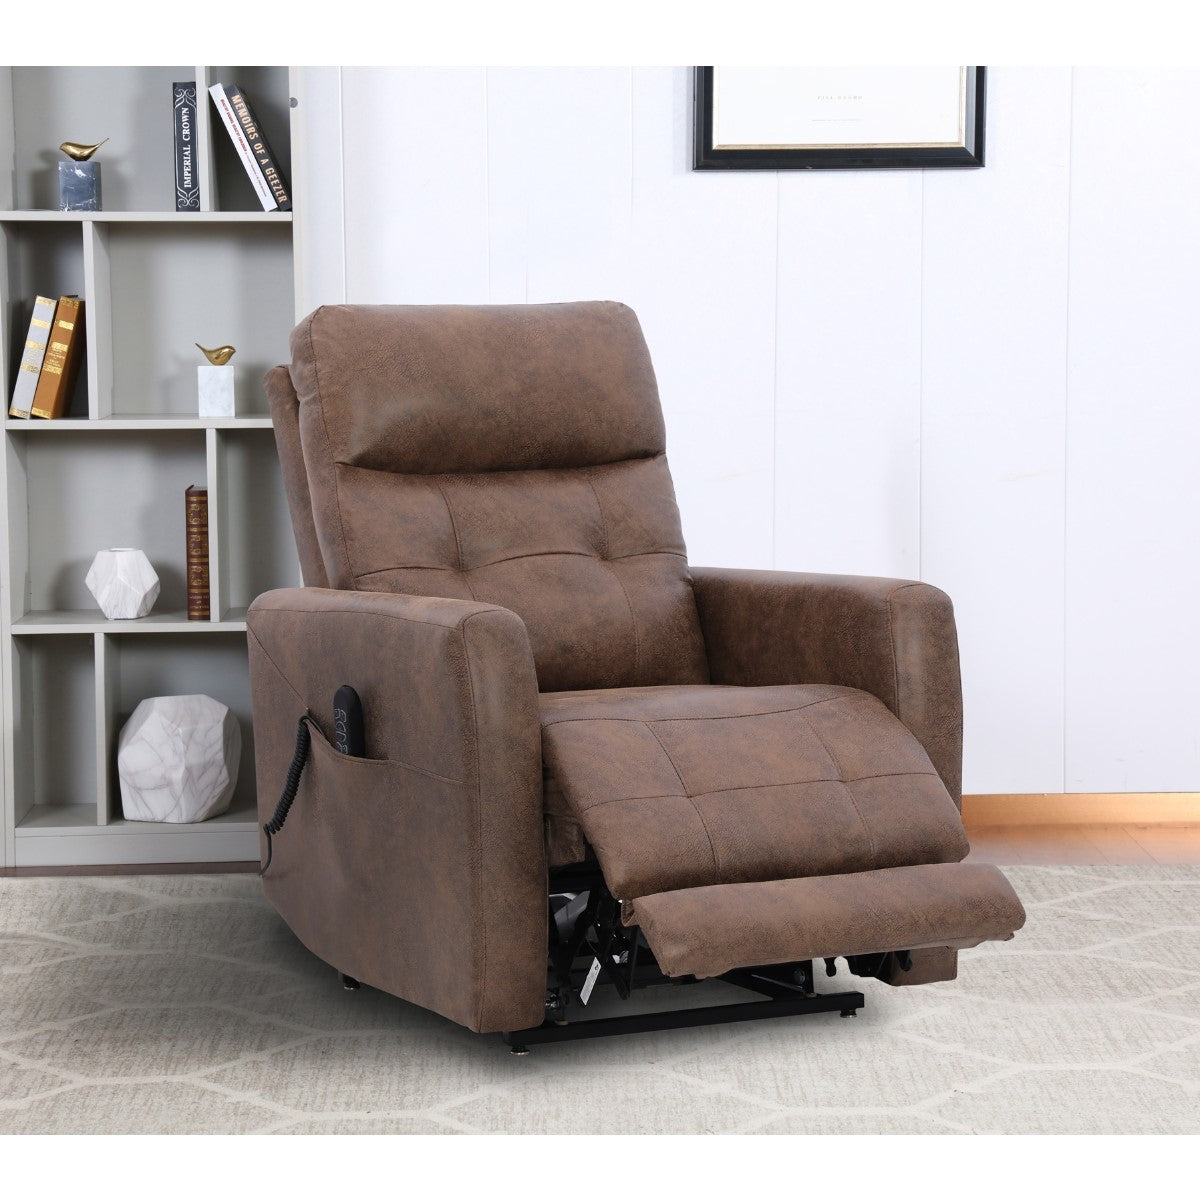 Aisha Medical Lift Chair with Power Headrests Brown 99988